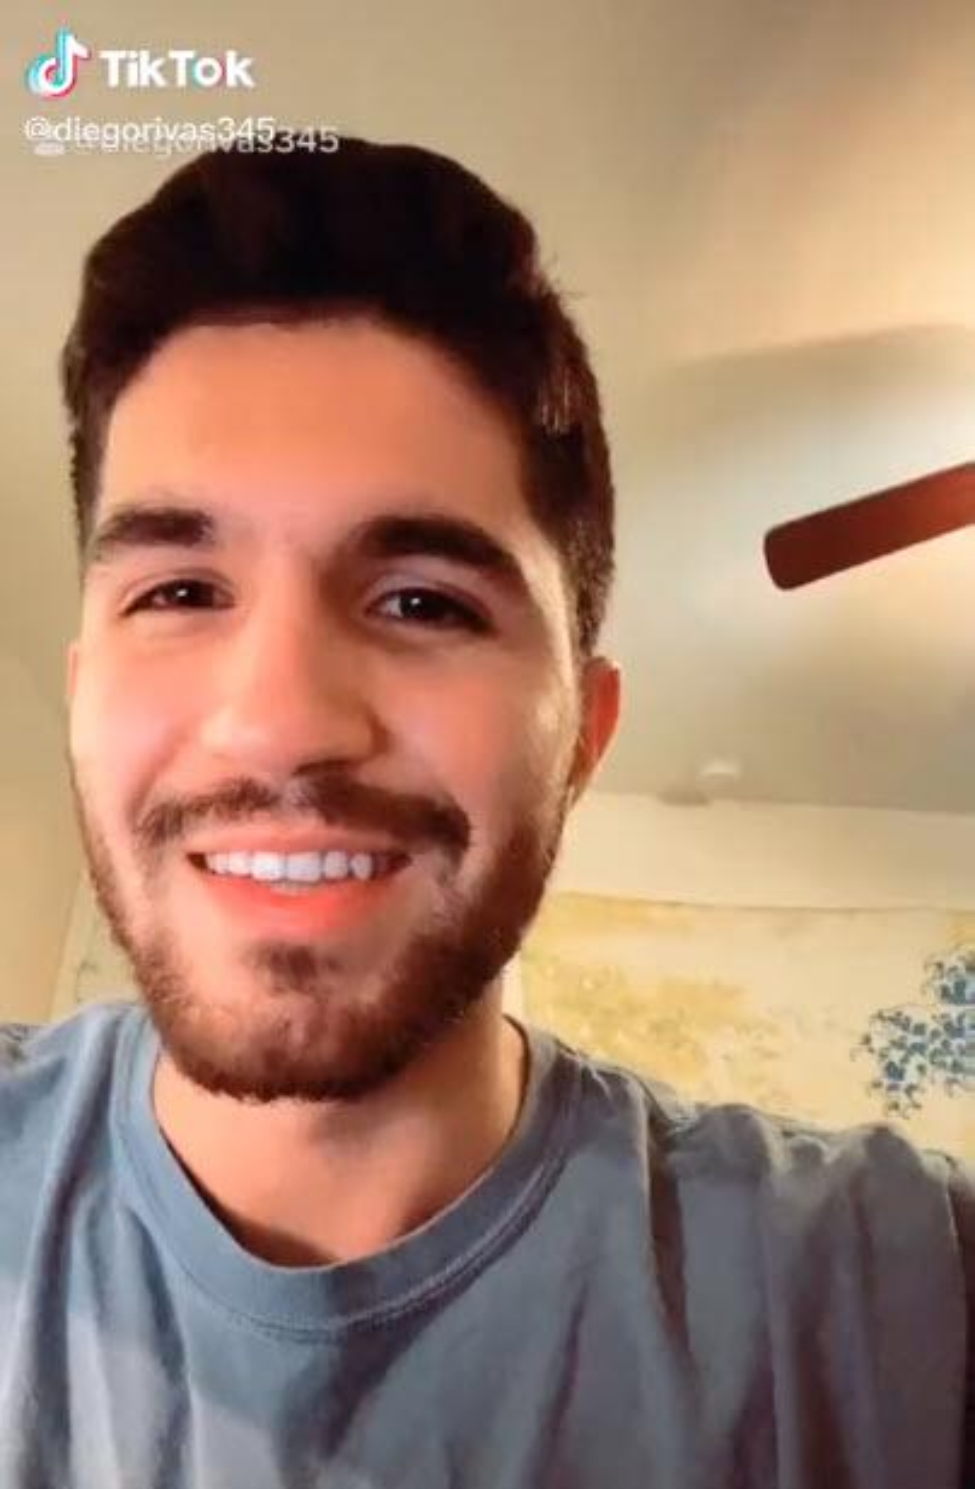 Diego Rivas’ TikTok videos have mimicked more than 20 different languages and dialects.